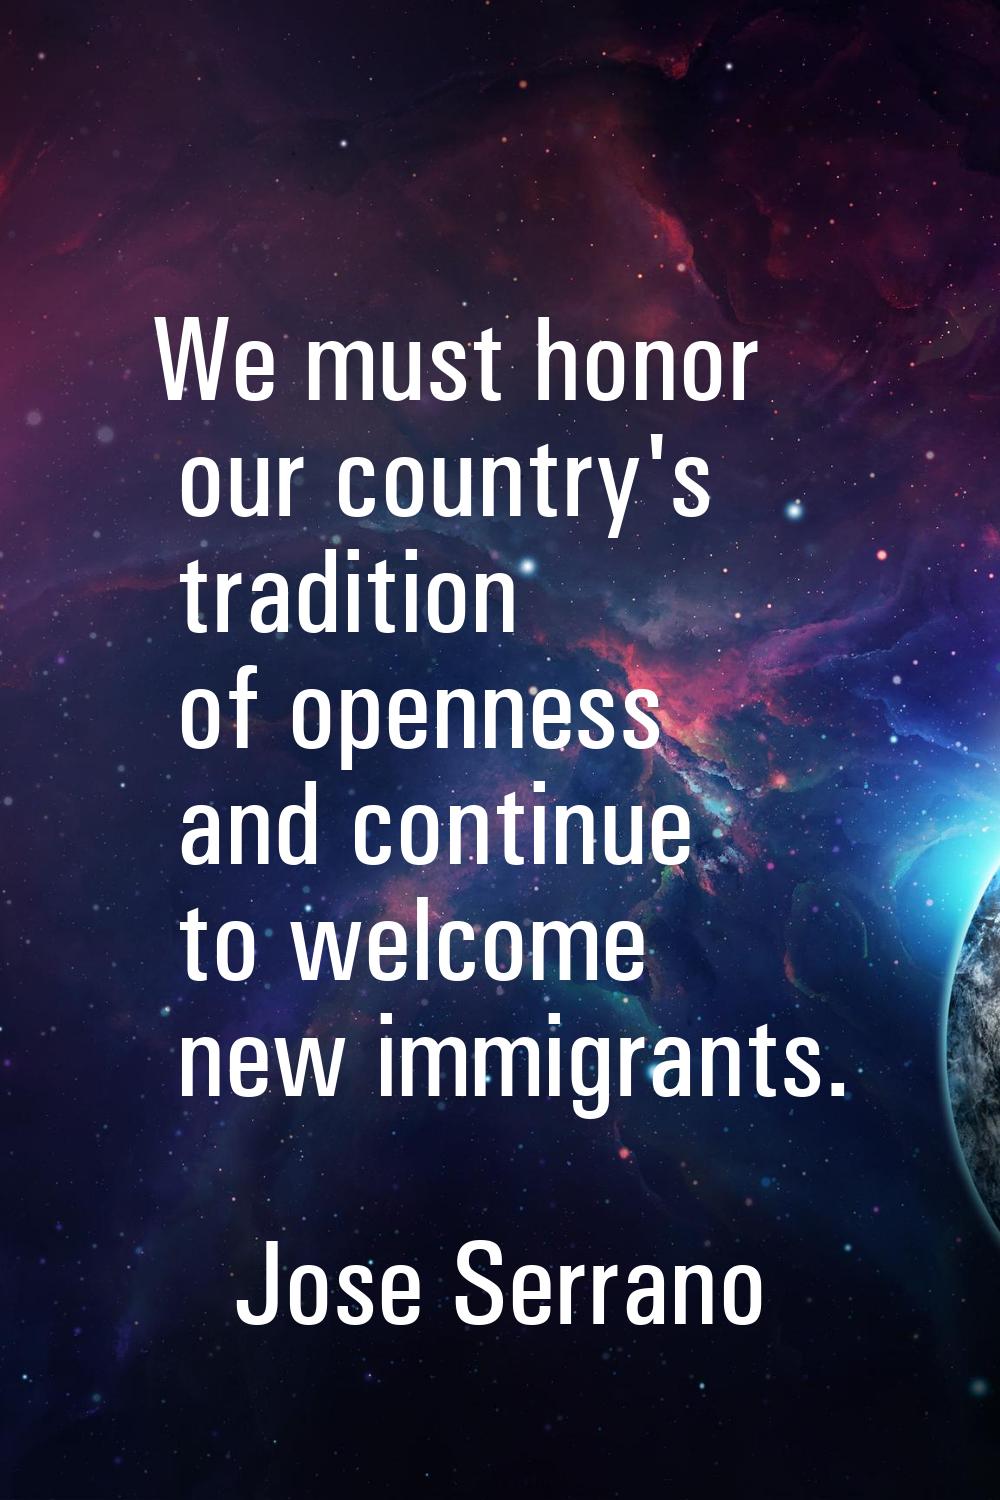 We must honor our country's tradition of openness and continue to welcome new immigrants.